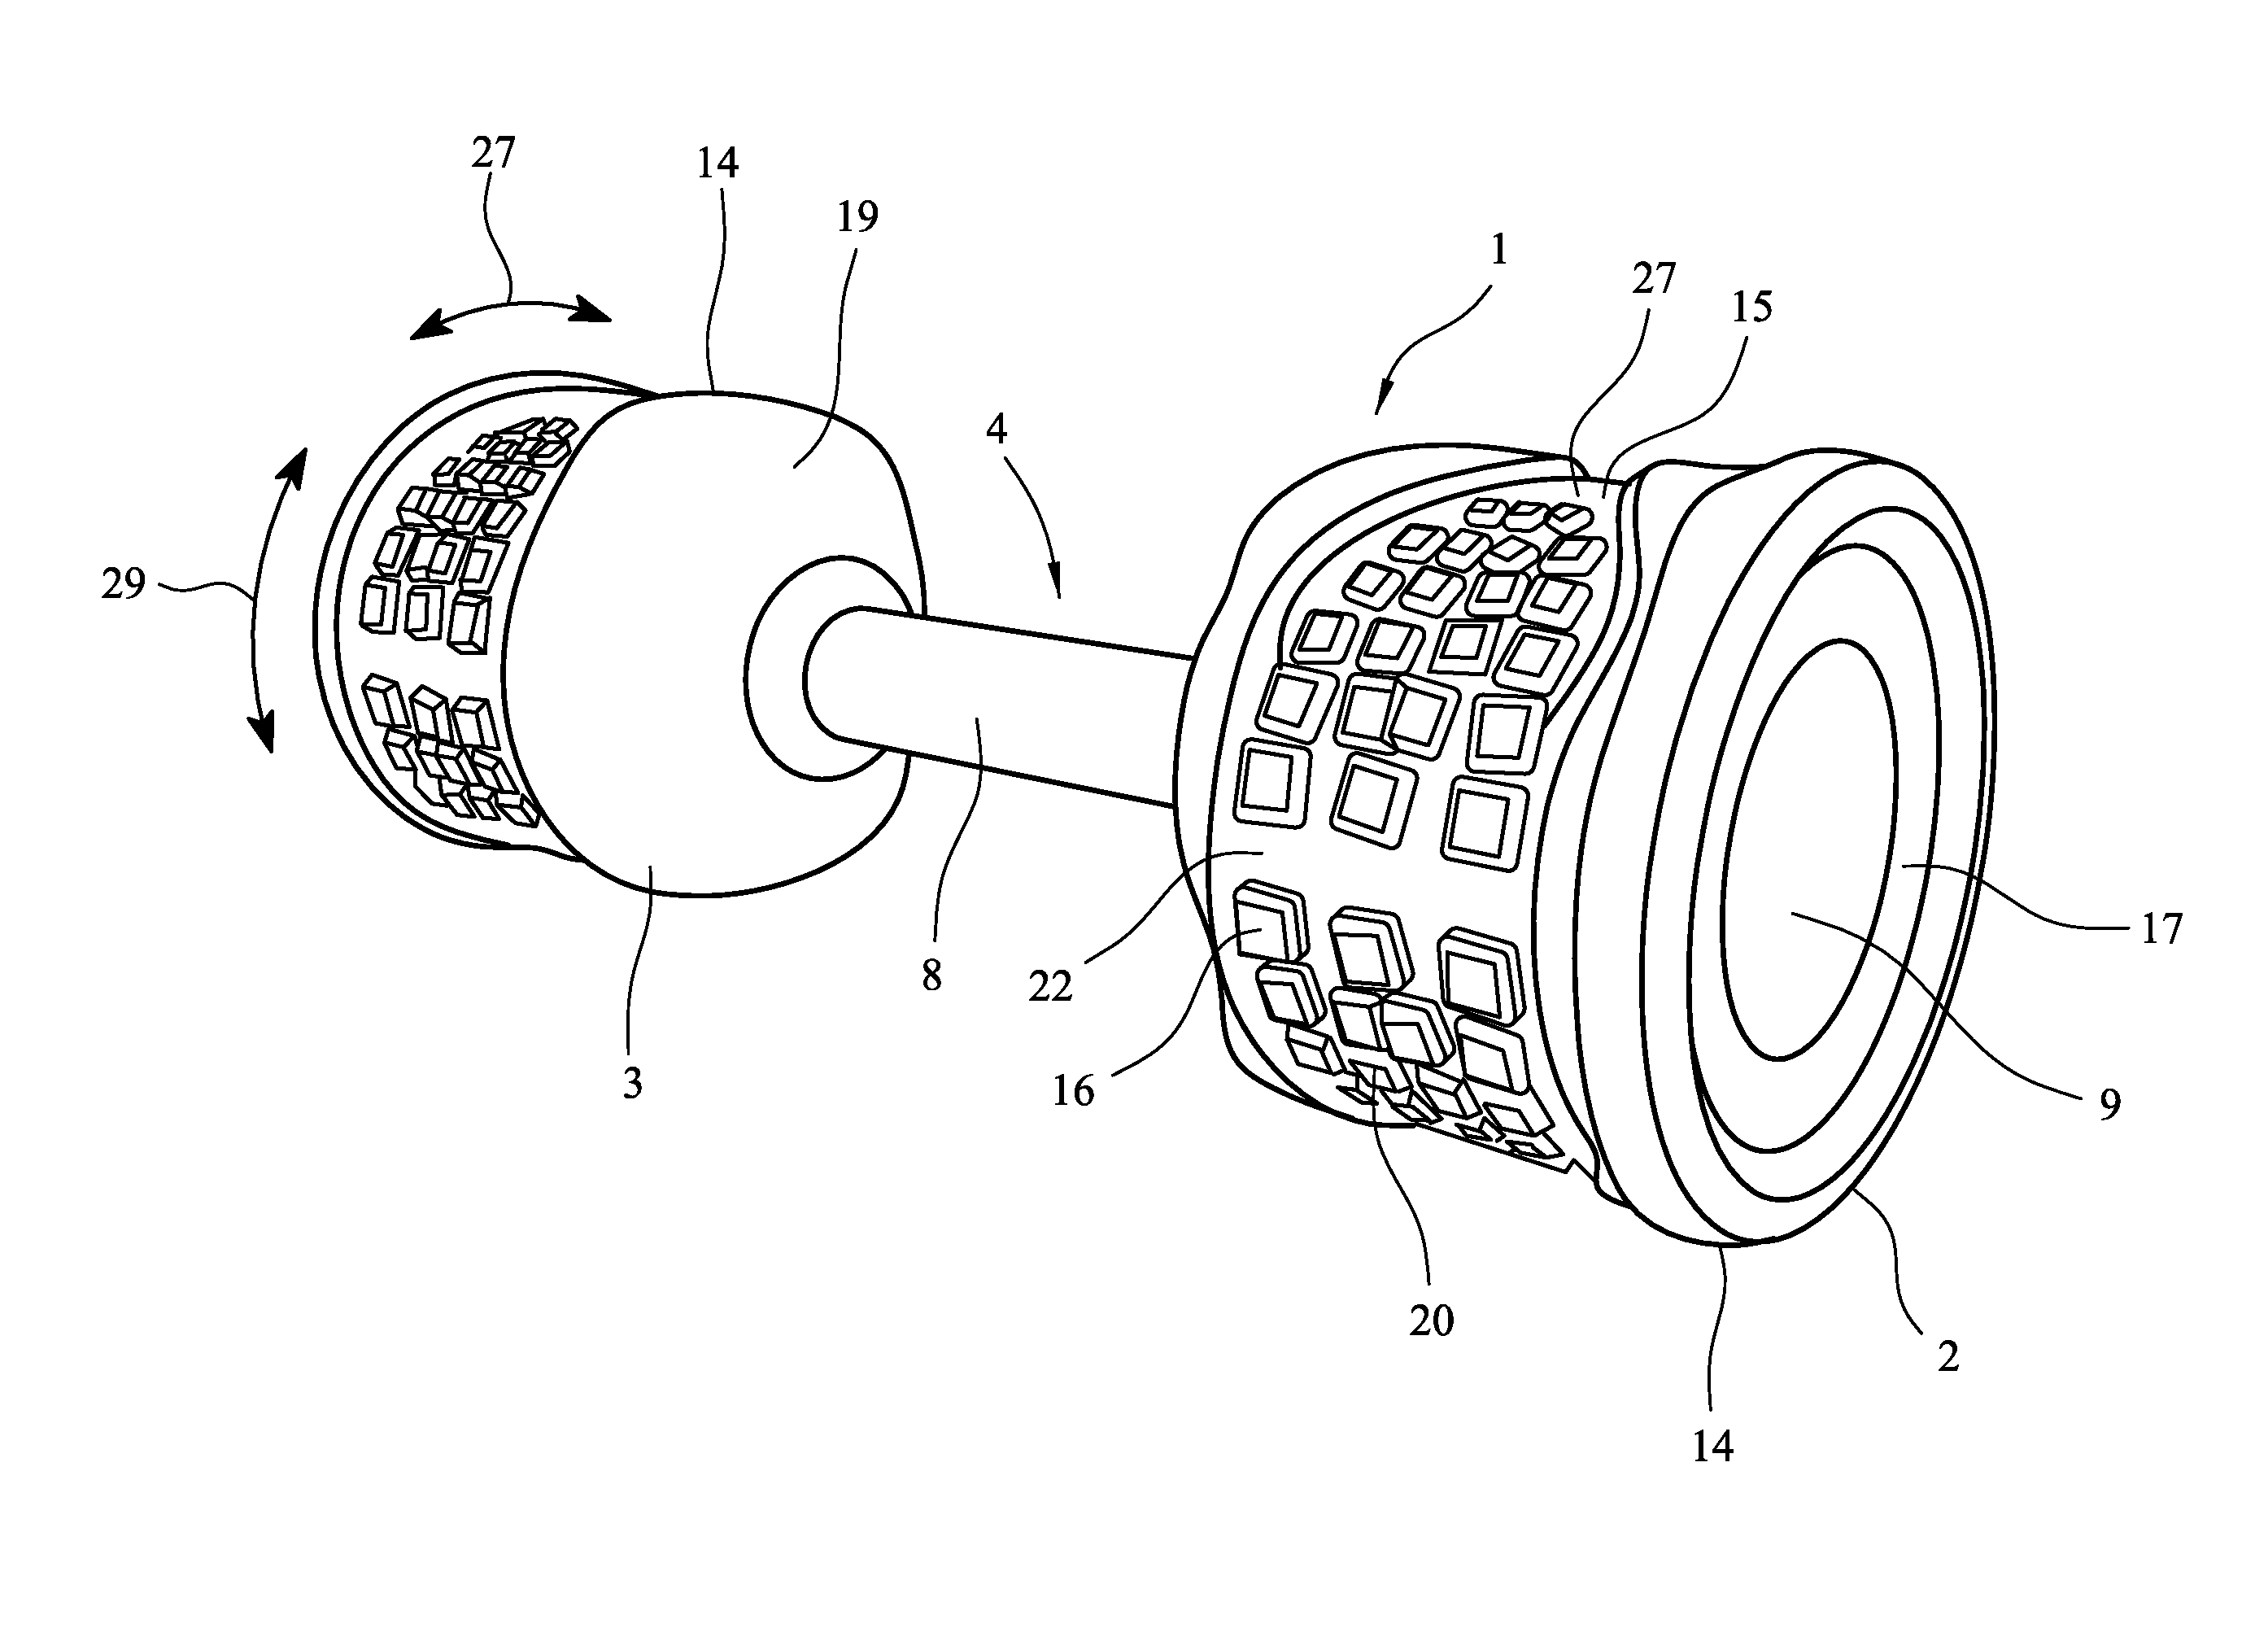 Exercise device weight for mounting to a lifting bar